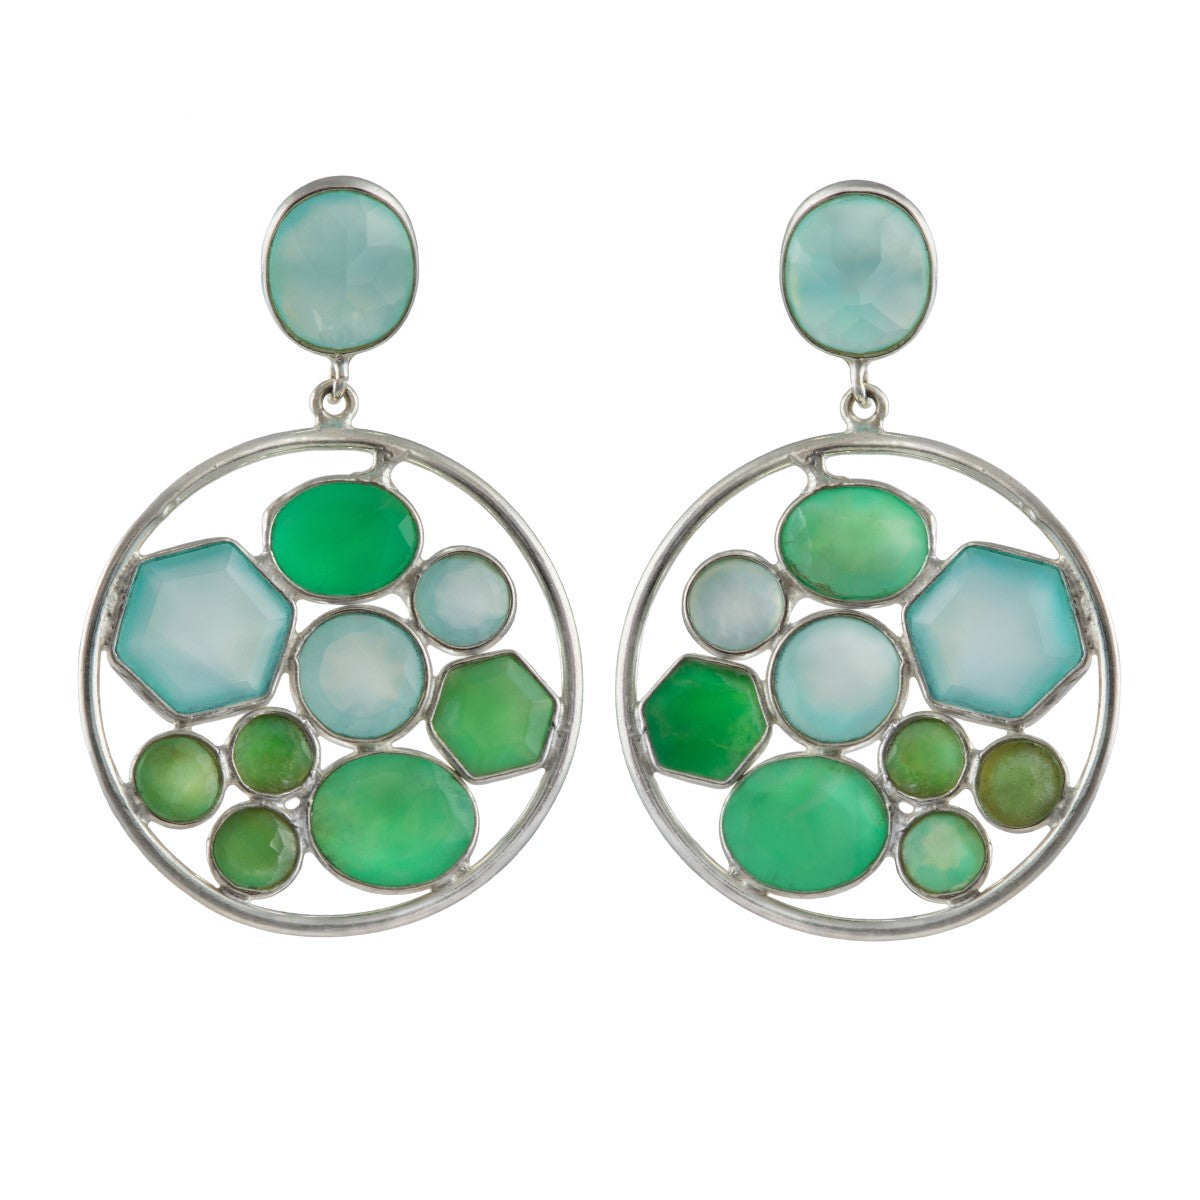 Long Gemstone Earrings with a Round Disc Drop with Stones in Sterling Silver - Green Chalcedony and Green Onyx